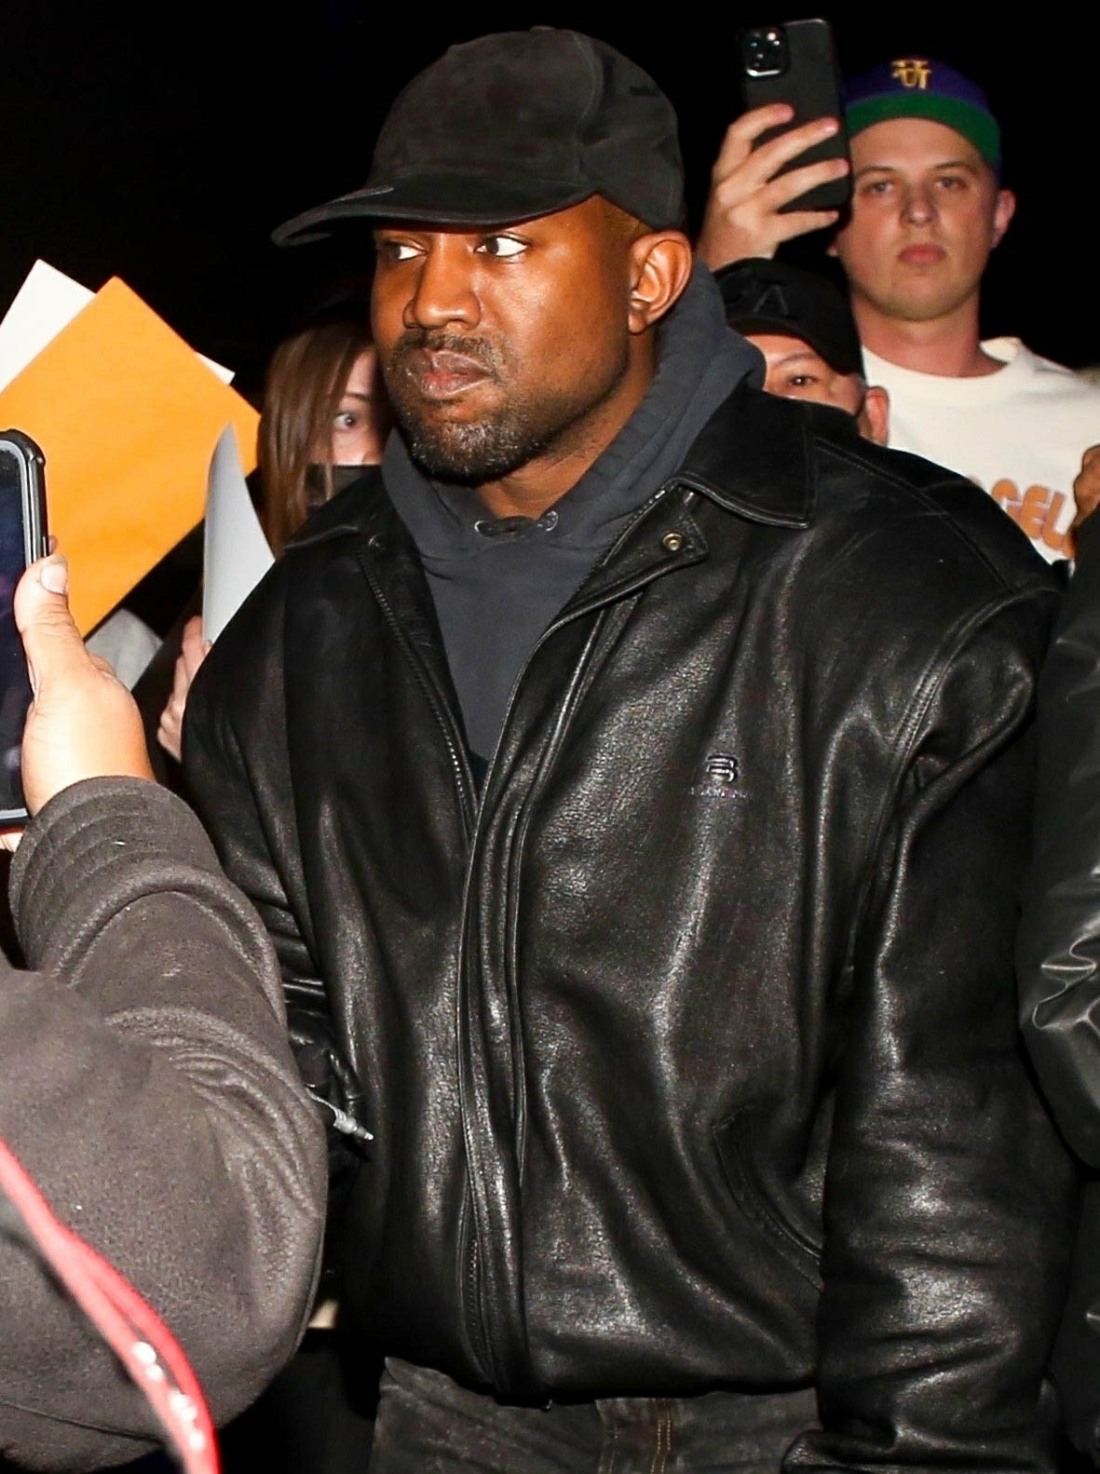 Kanye West causes quite the commotion as fans mob him while out for the night in Los Angeles!